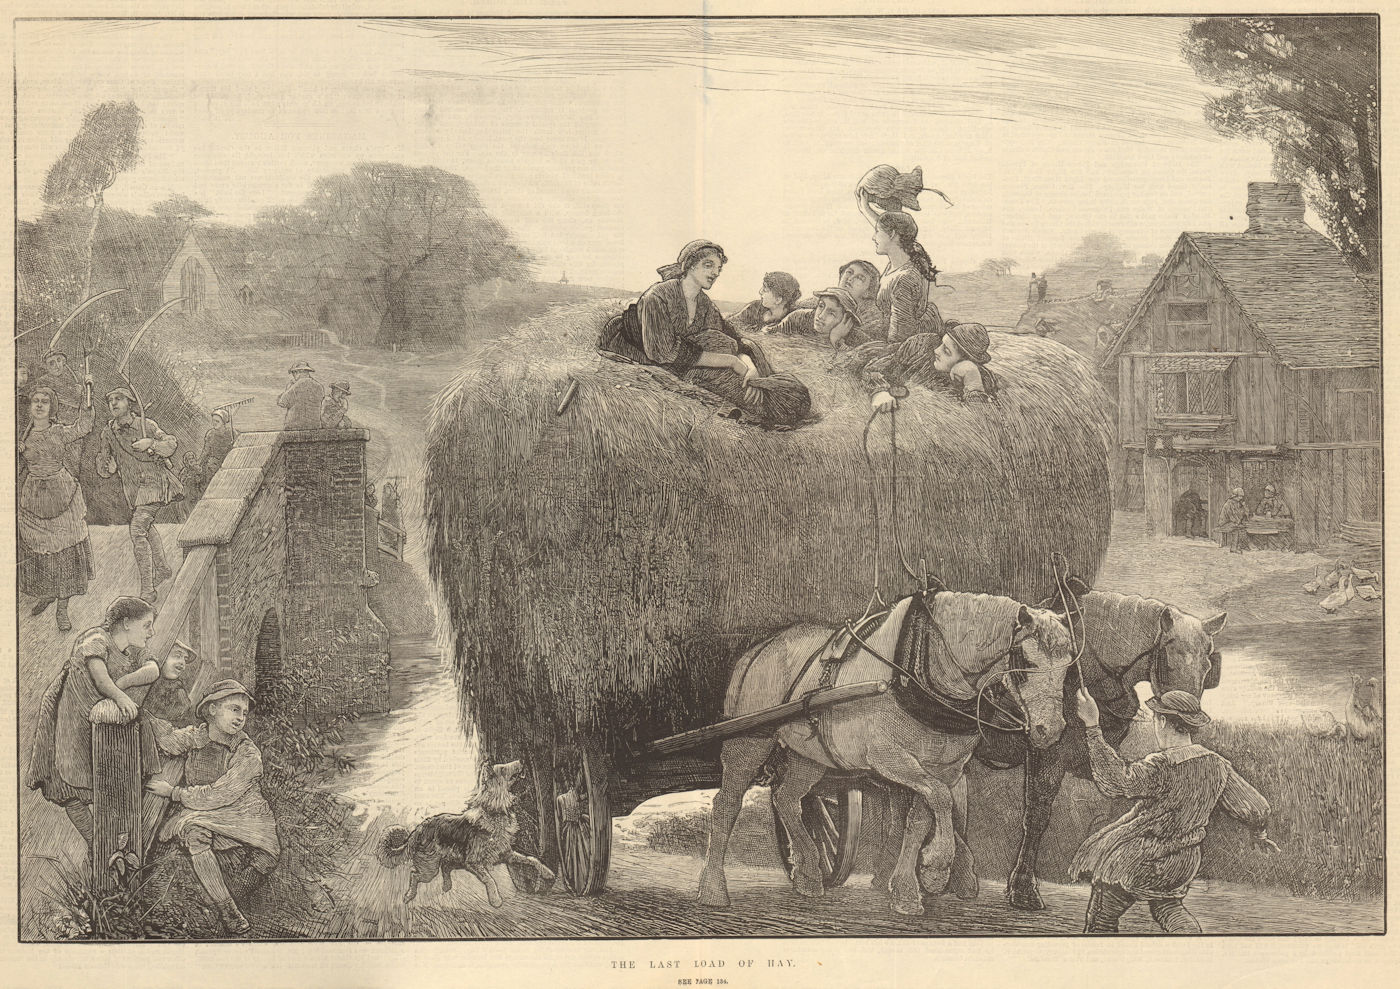 Associate Product The last load of hay. Farming. Family 1881 antique ILN full page print